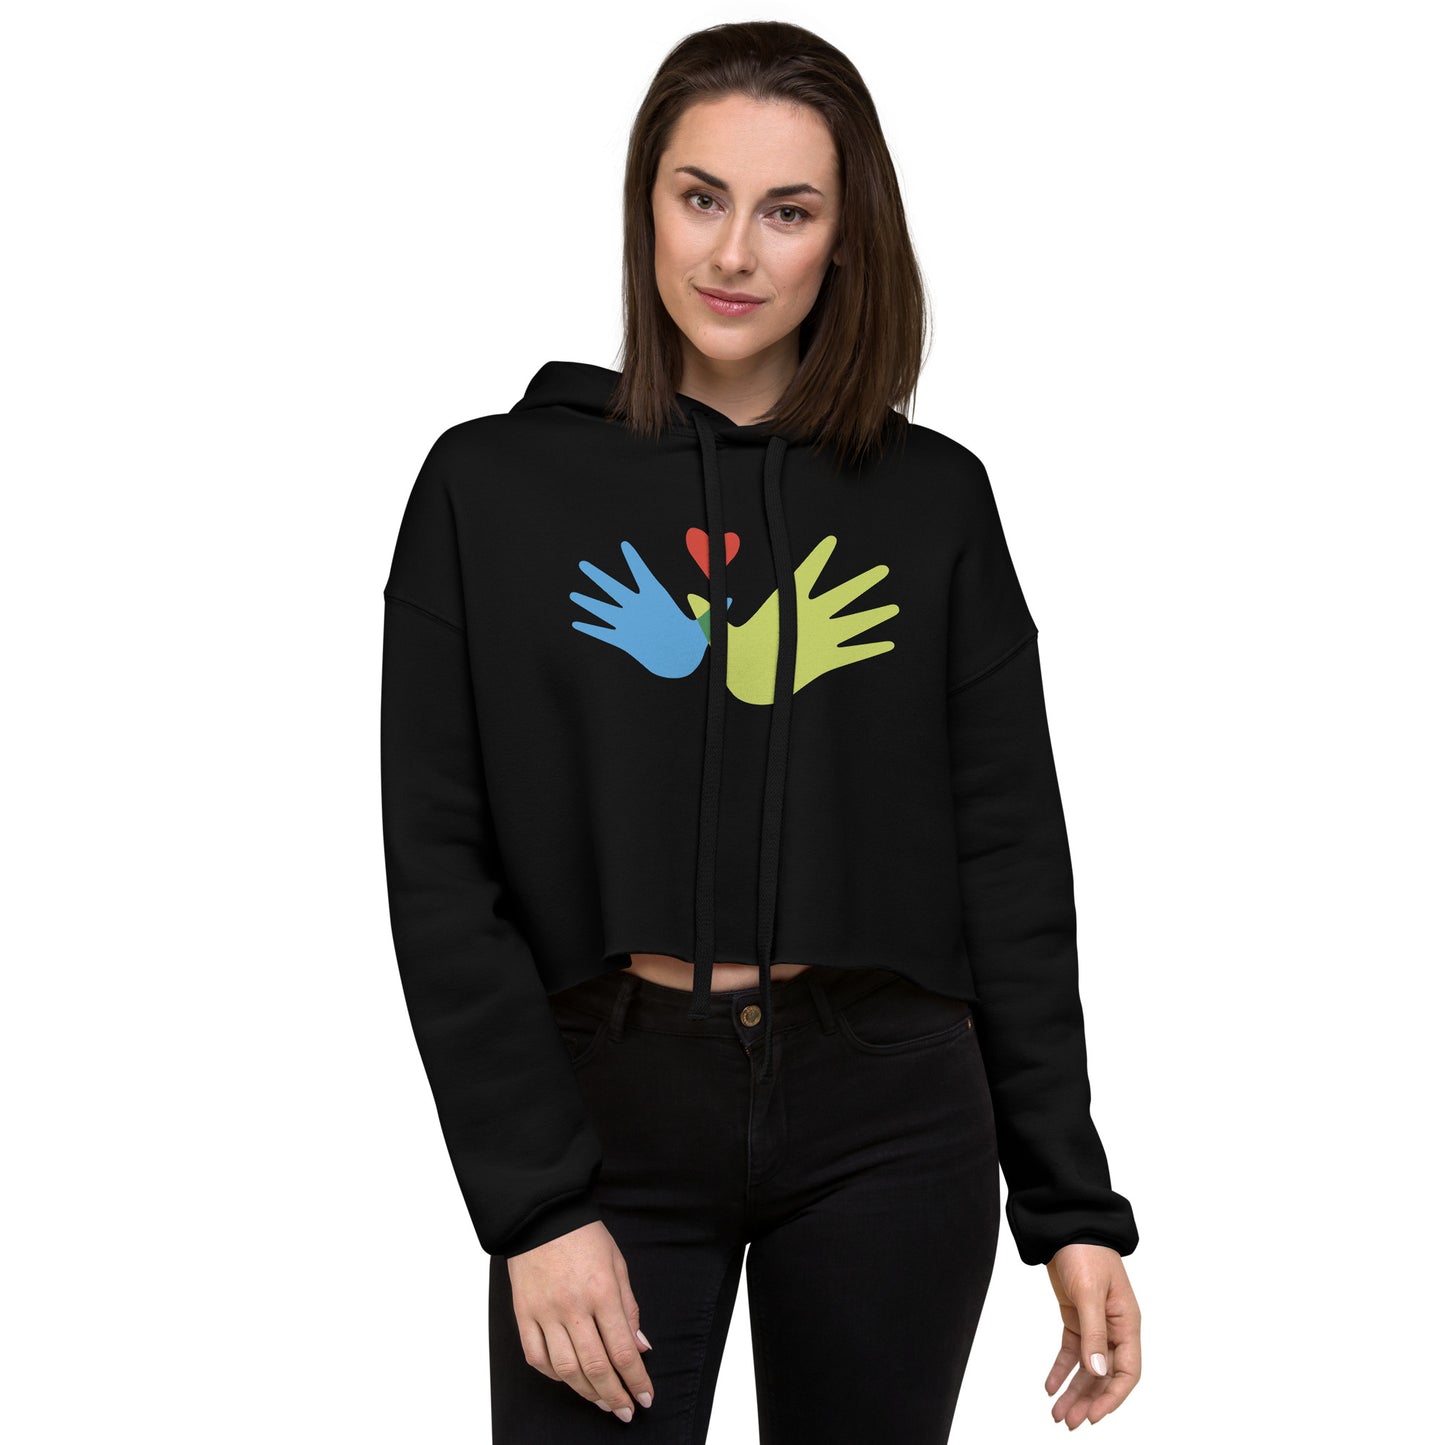 Williams Syndrome Association — Crop Hoodie